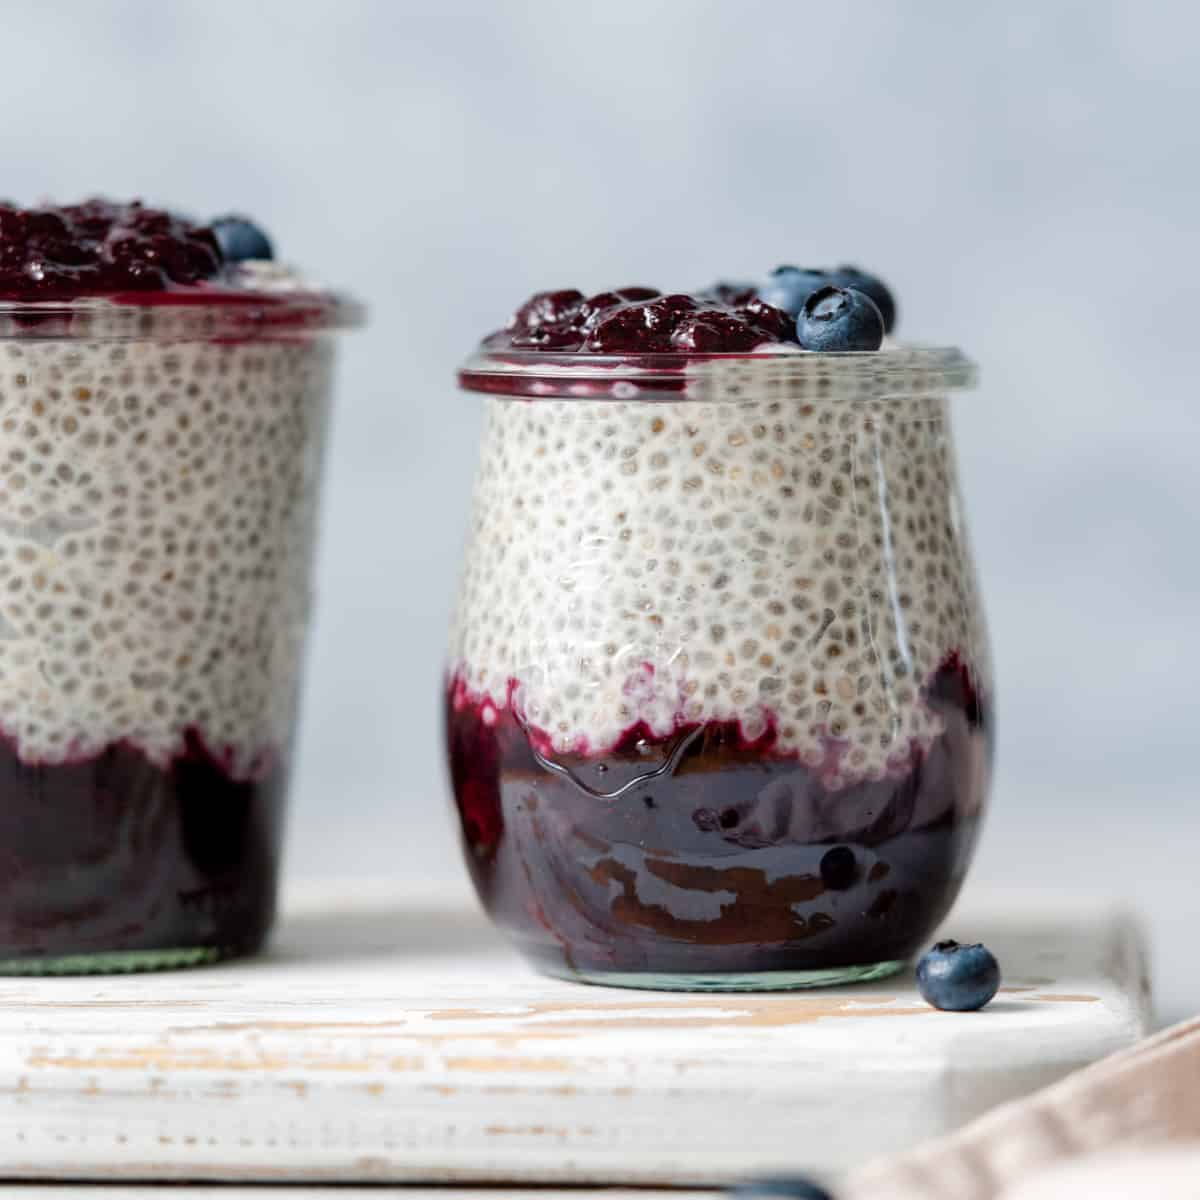 Side shot of a jar with blueberry jam at the bottom of the jar and chia pudding on the top layer topped with more blueberries.